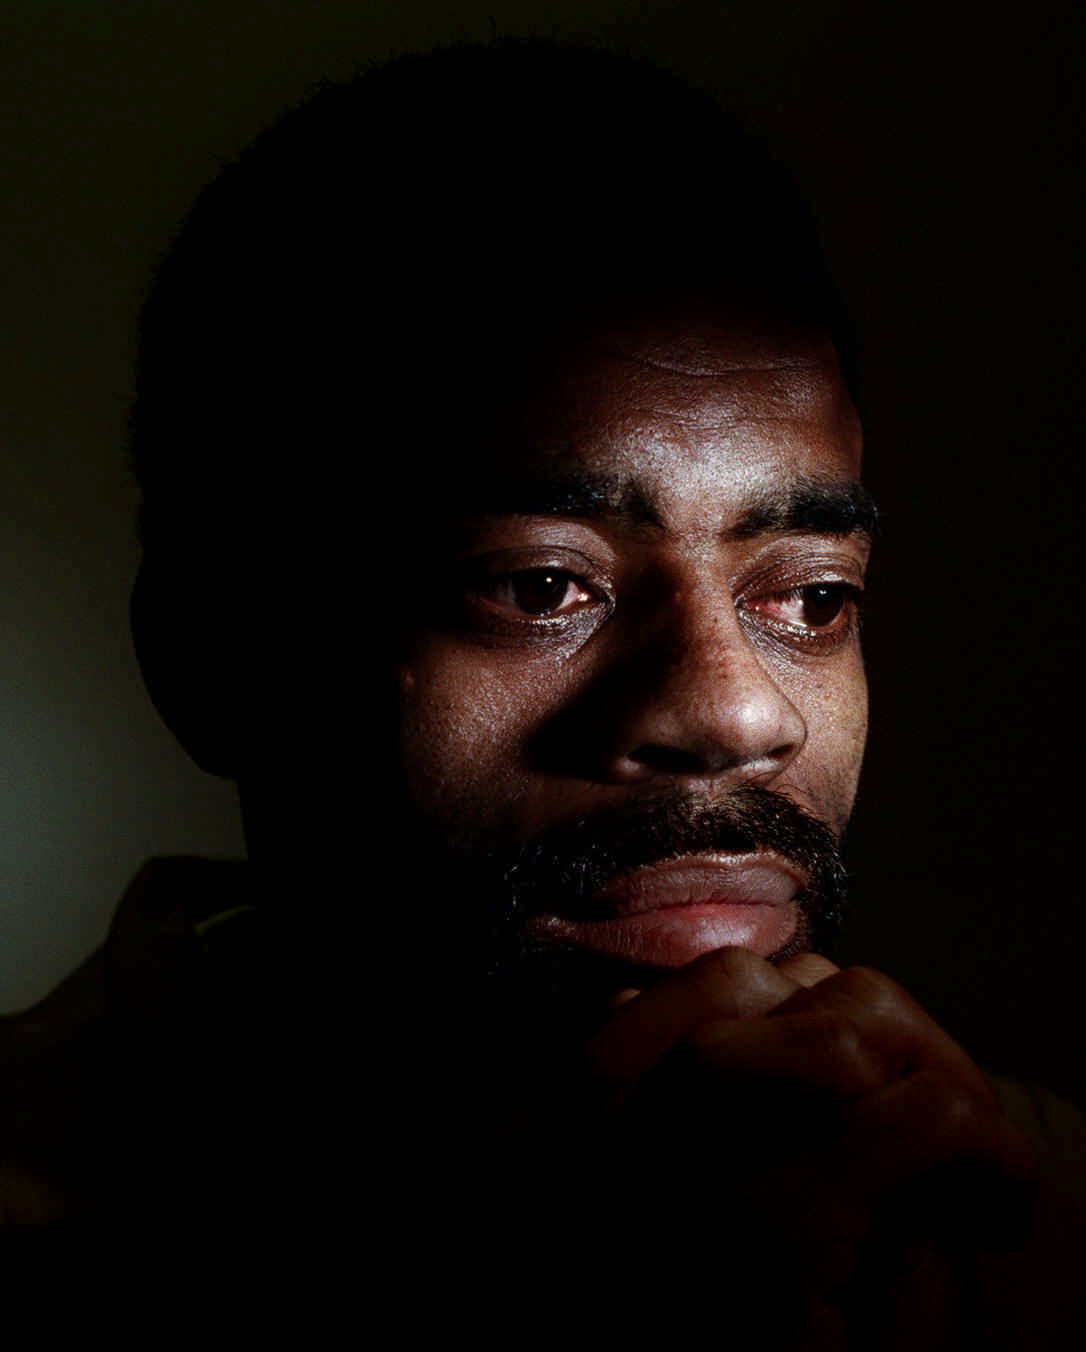 The Real Freeway Rick Ross To Host ‘After The Snow’ Podcast Recapping FX’s Snowfall Episodes